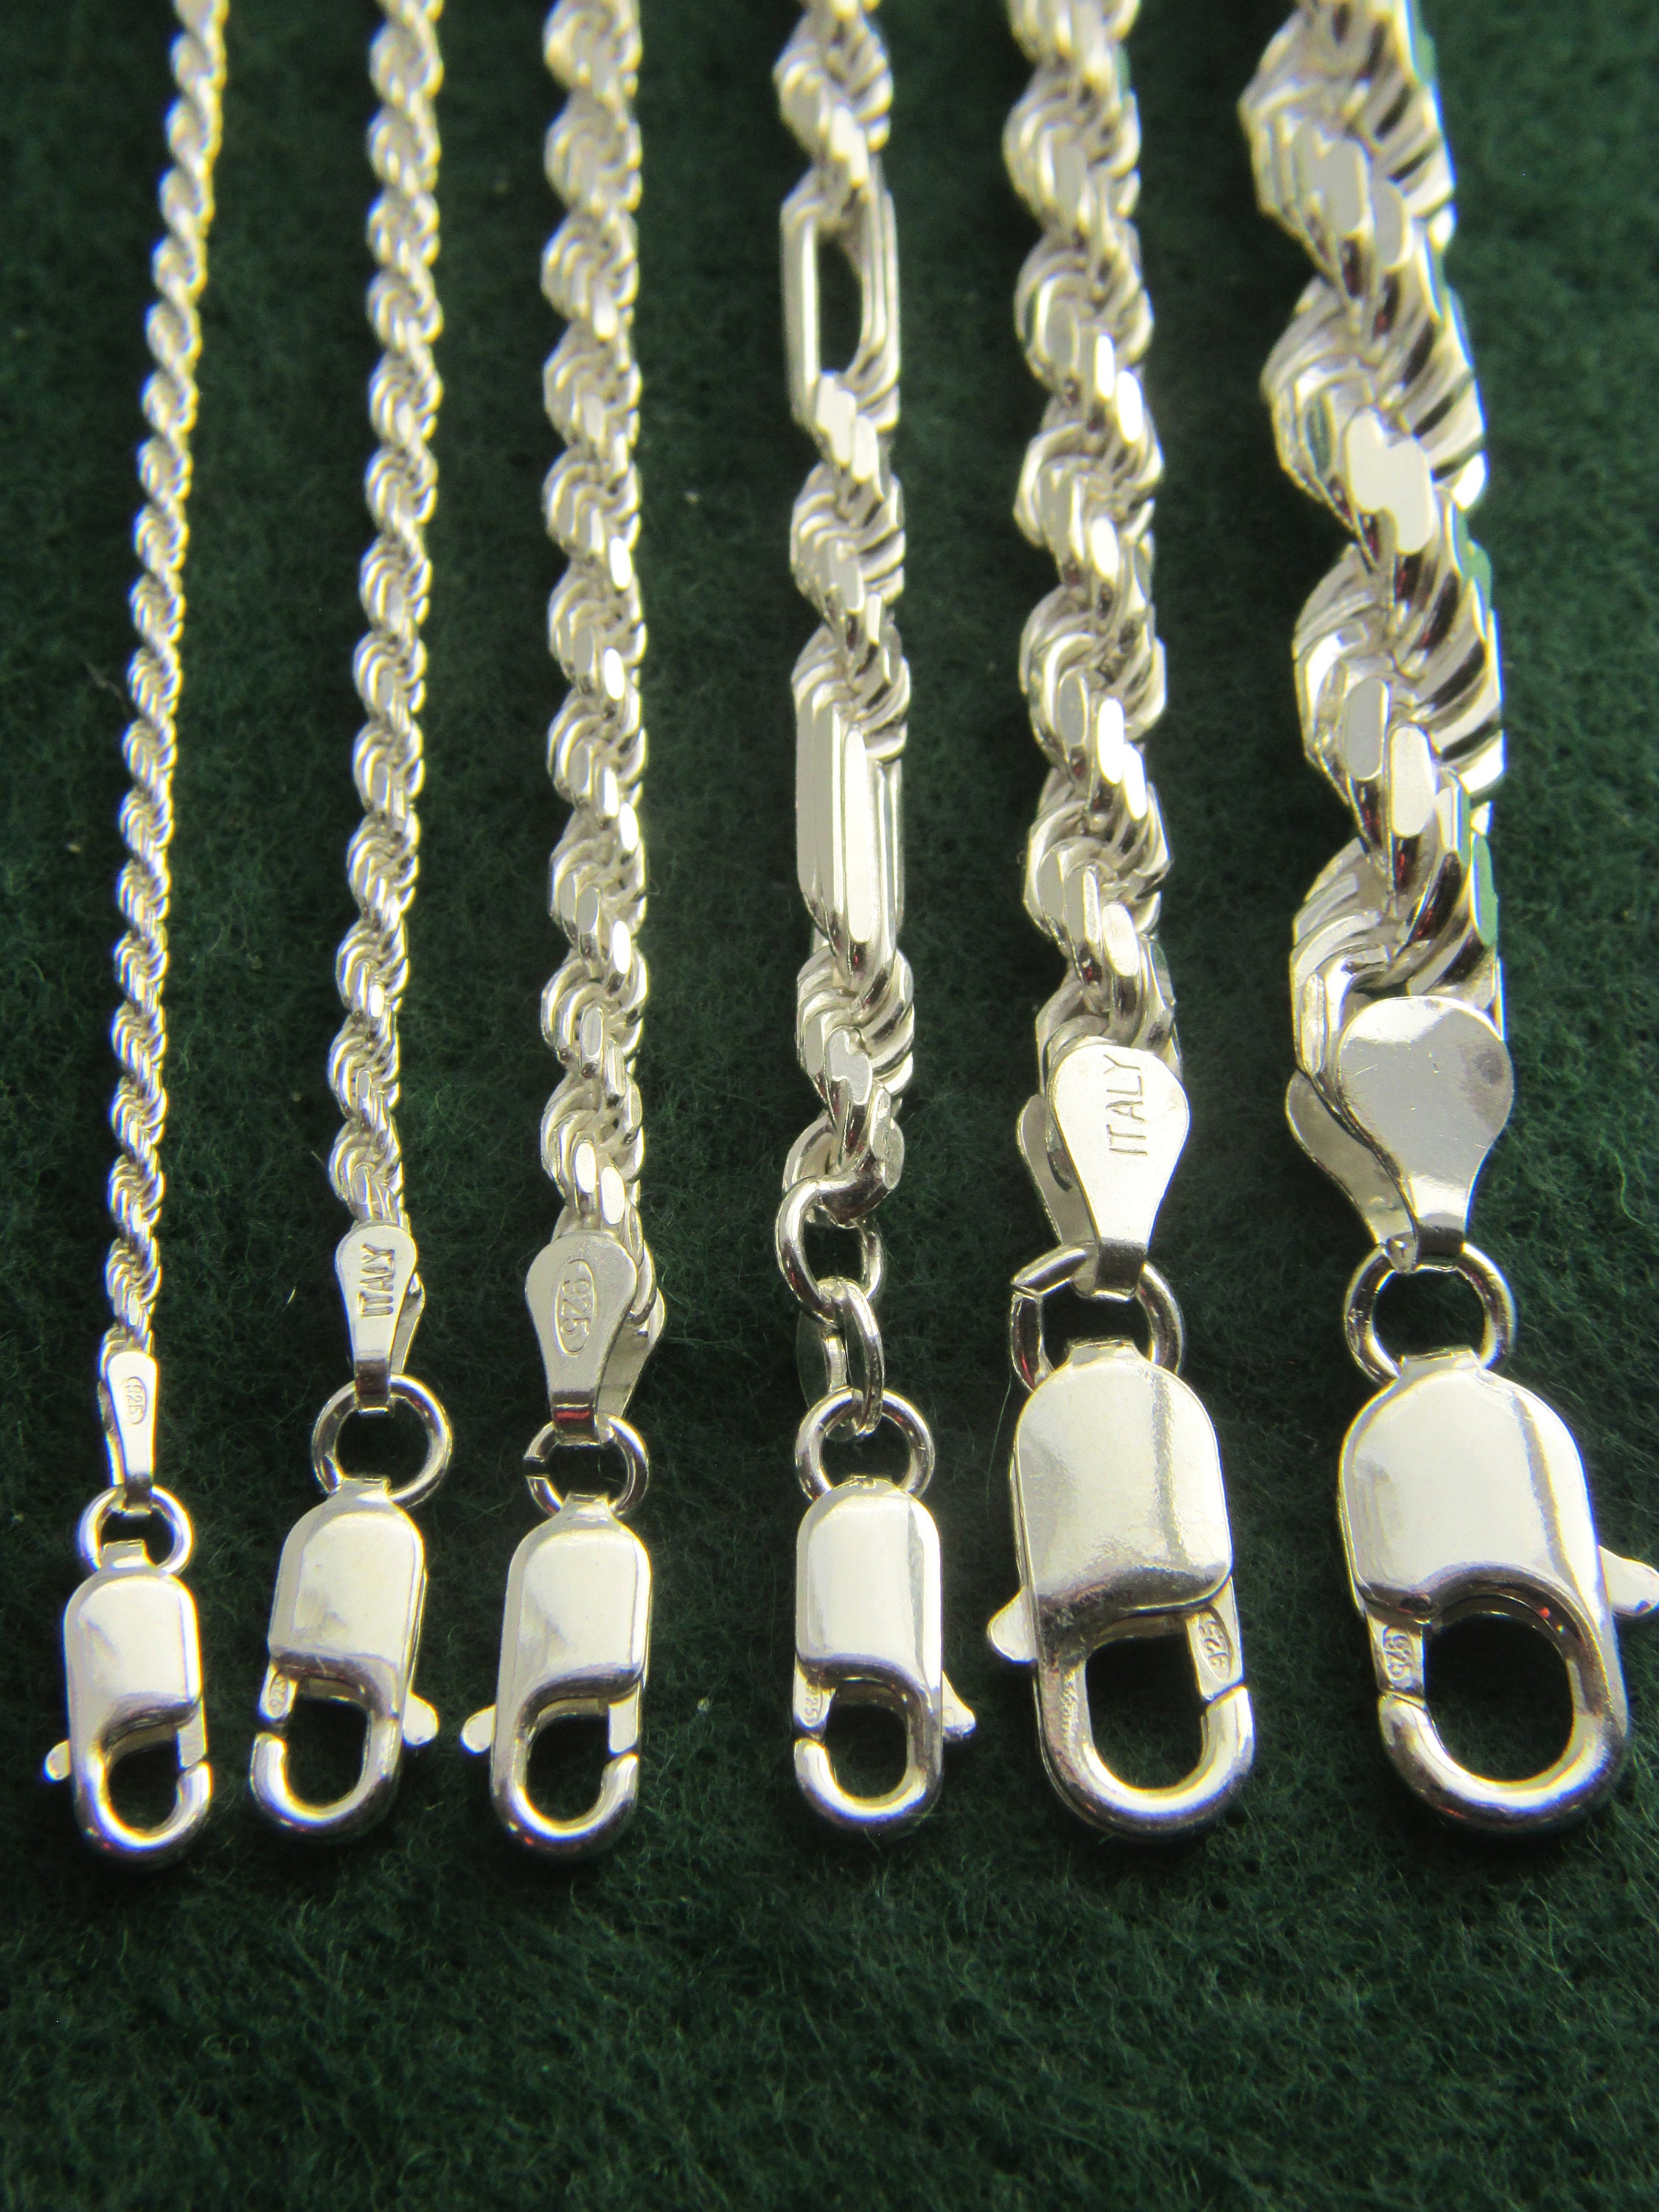 925 Sterling Silver Solid Rope Chain Necklace in Silver Choice of Lengths 16 18 20 22 24 30 26 28 and Variety of mm Options 